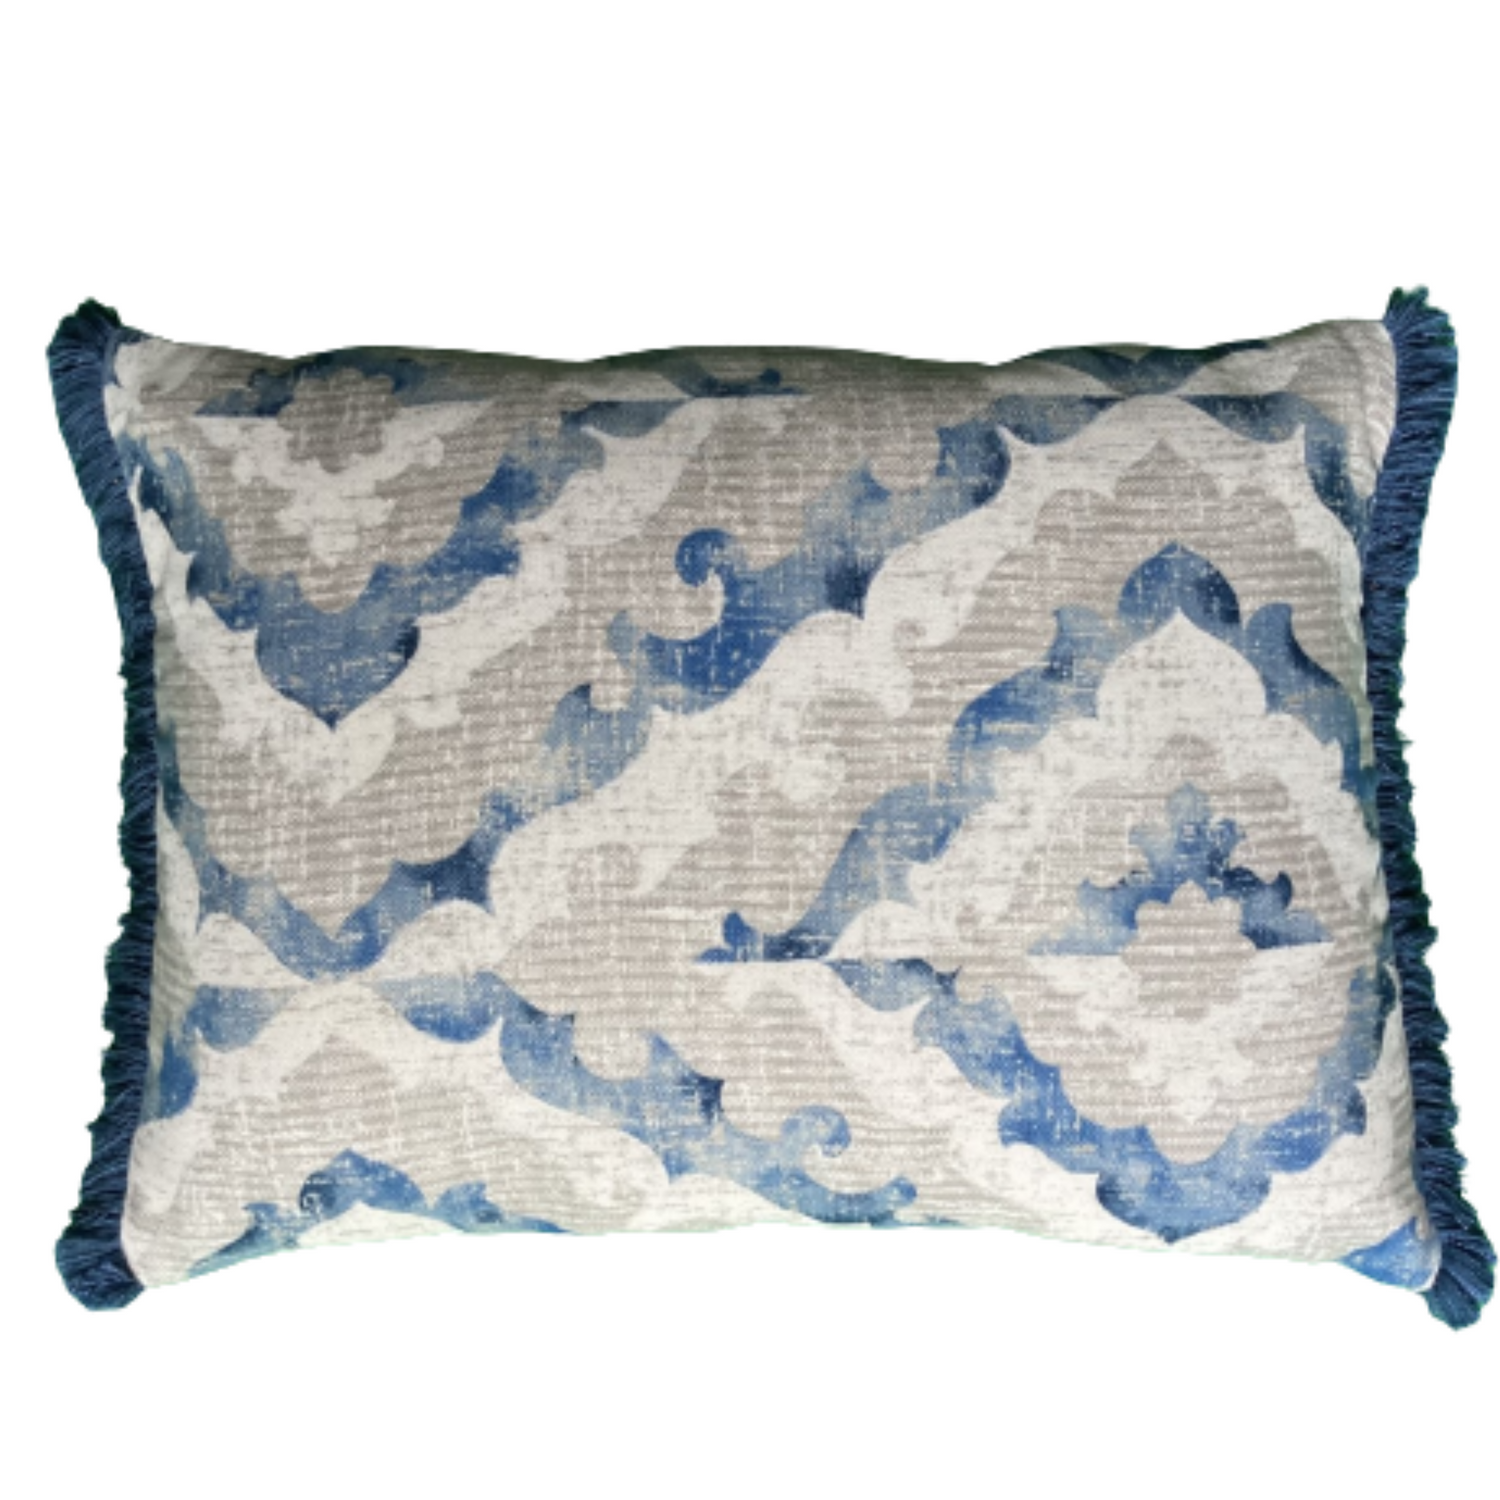 Odell Blue and Grey Ikat Lumbar 13 X 17 Rectangle Designer Pillow with Down Feather Insert